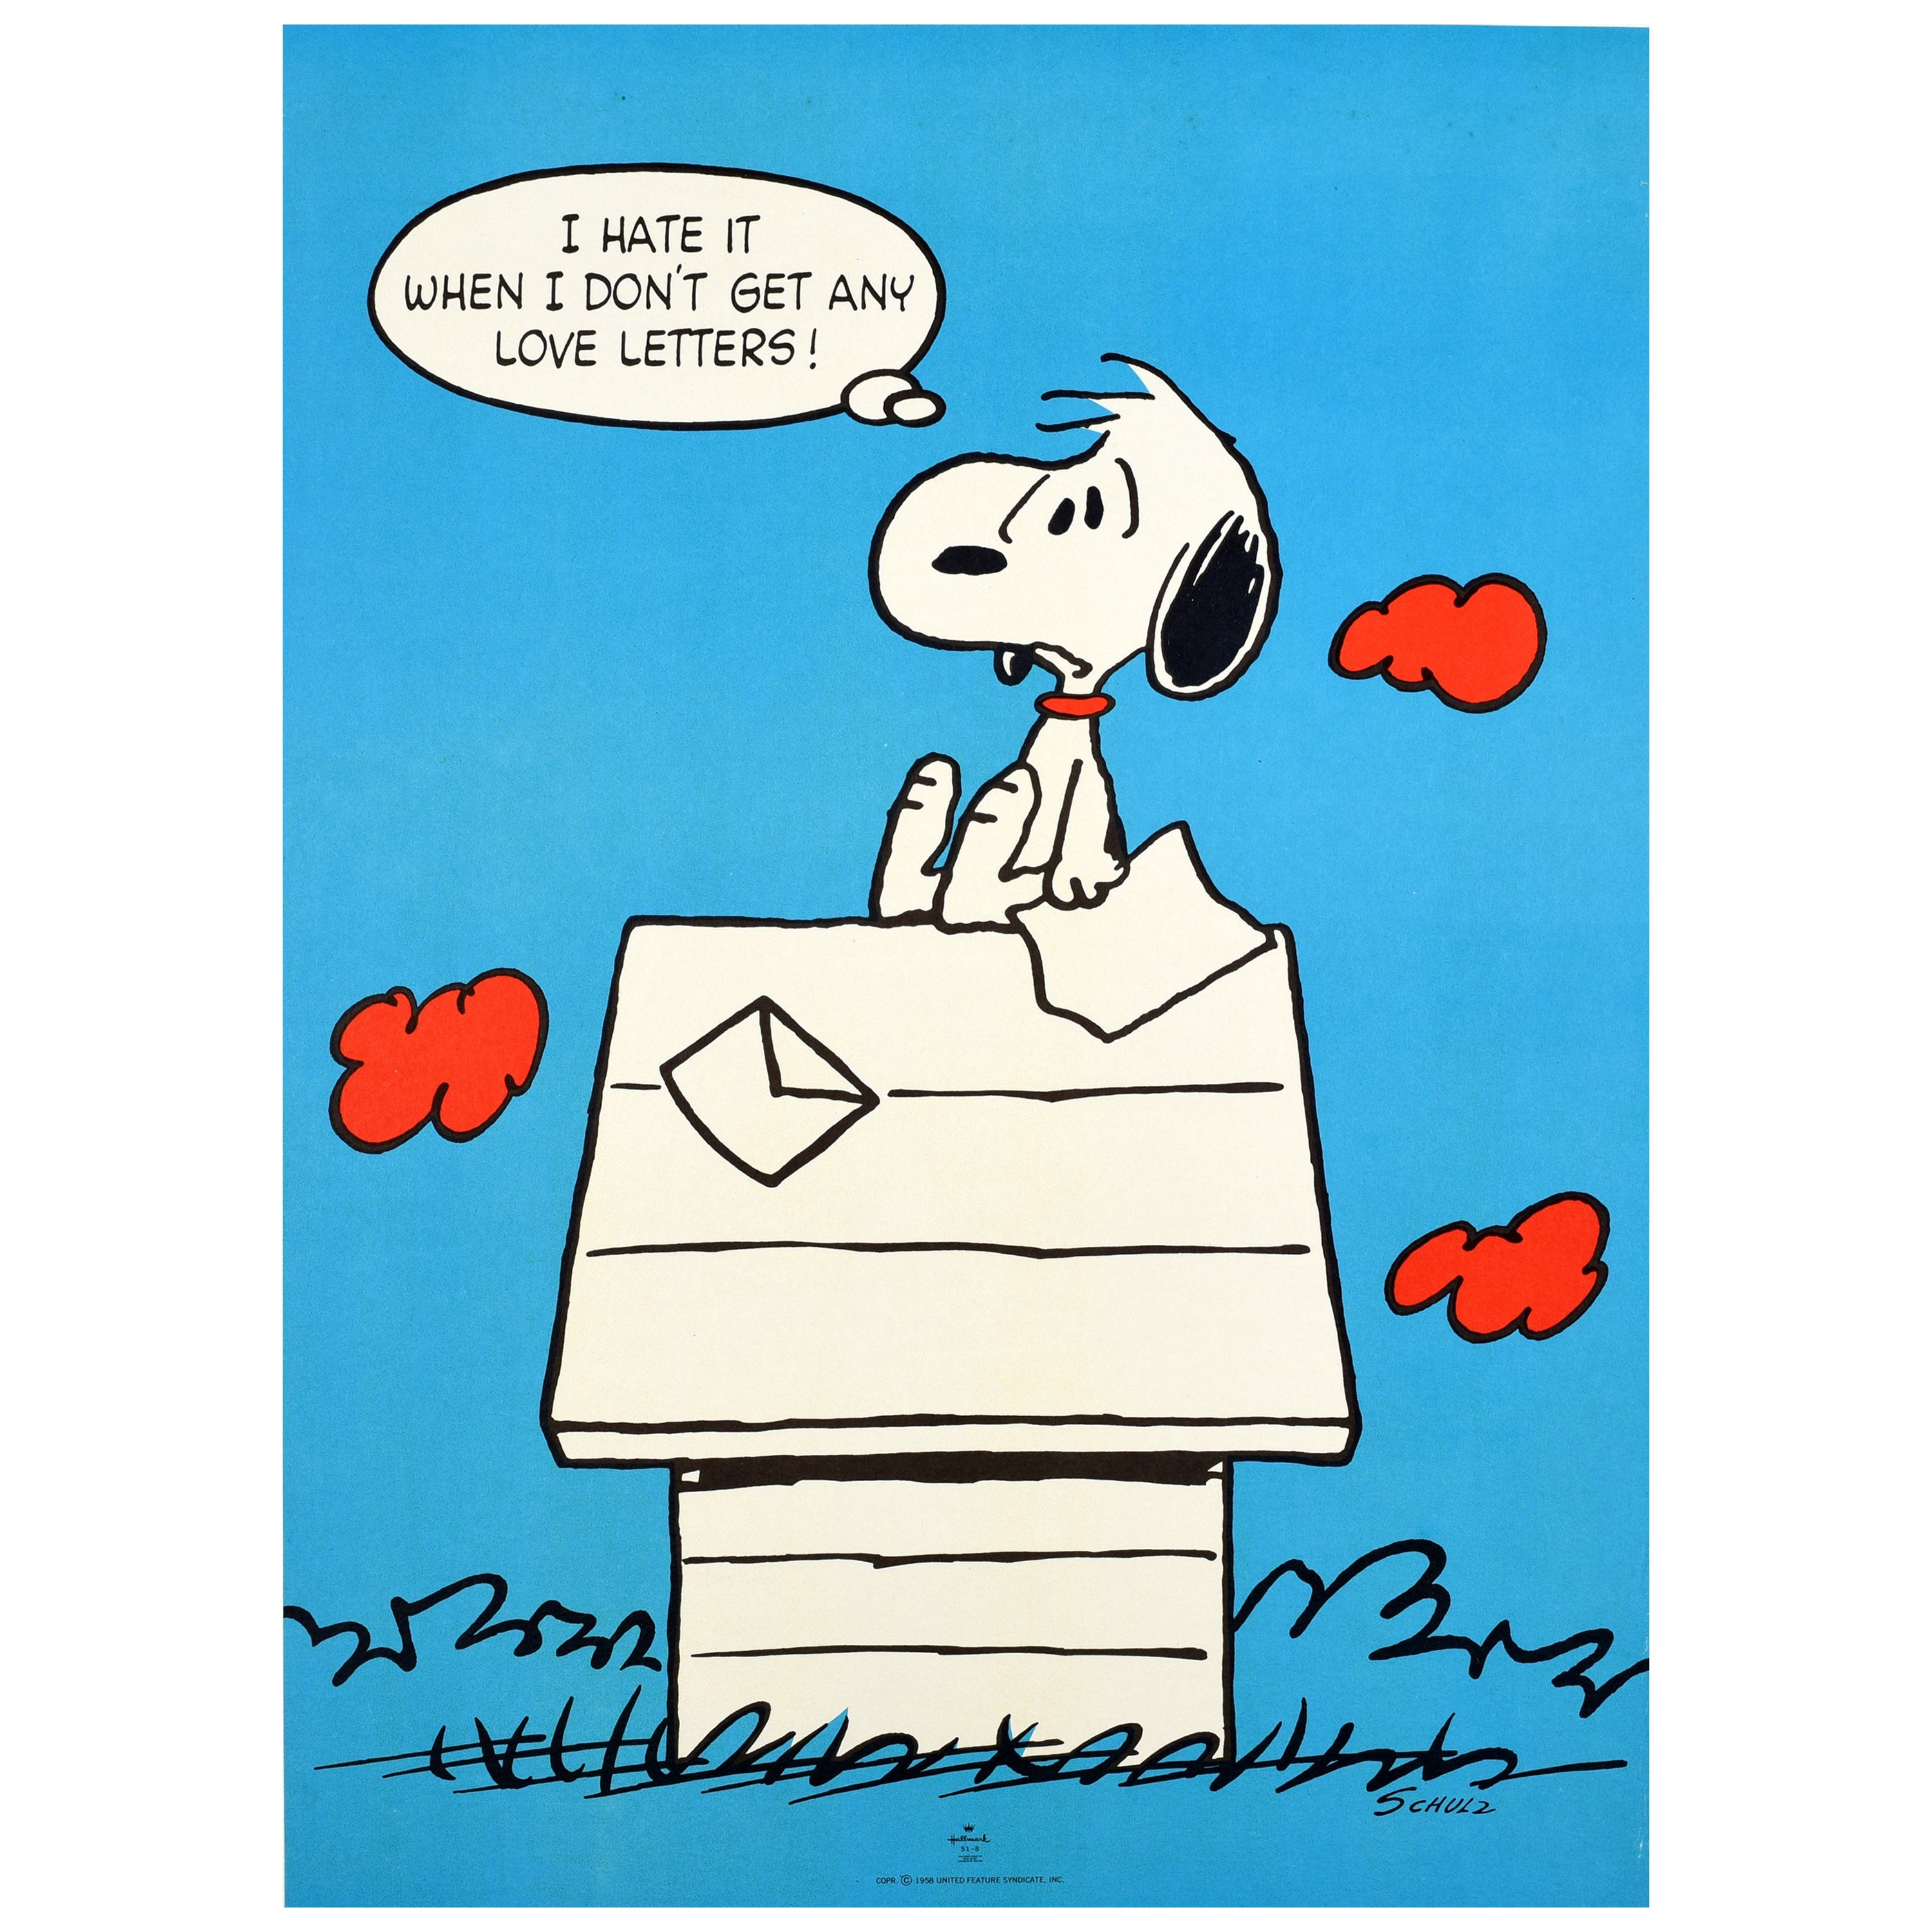 Original Vintage Poster I Hate It When I Don't Get Any Love Letters Snoopy Dog For Sale